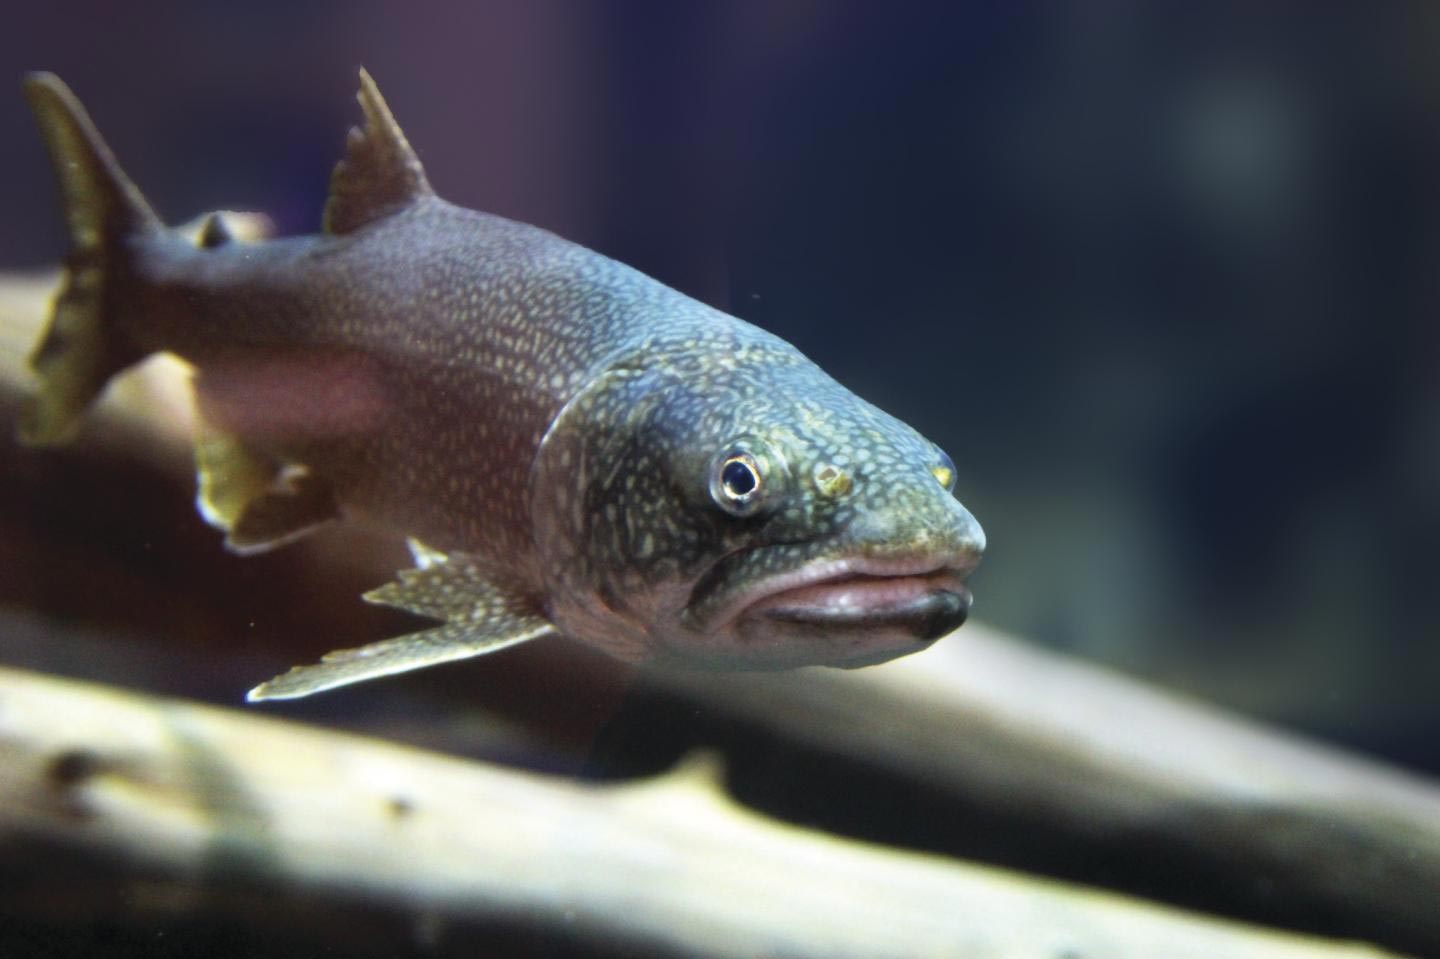 Invasive Species to Blame for High Mercury Concentrations in Great Lakes Fish - SciTechDaily